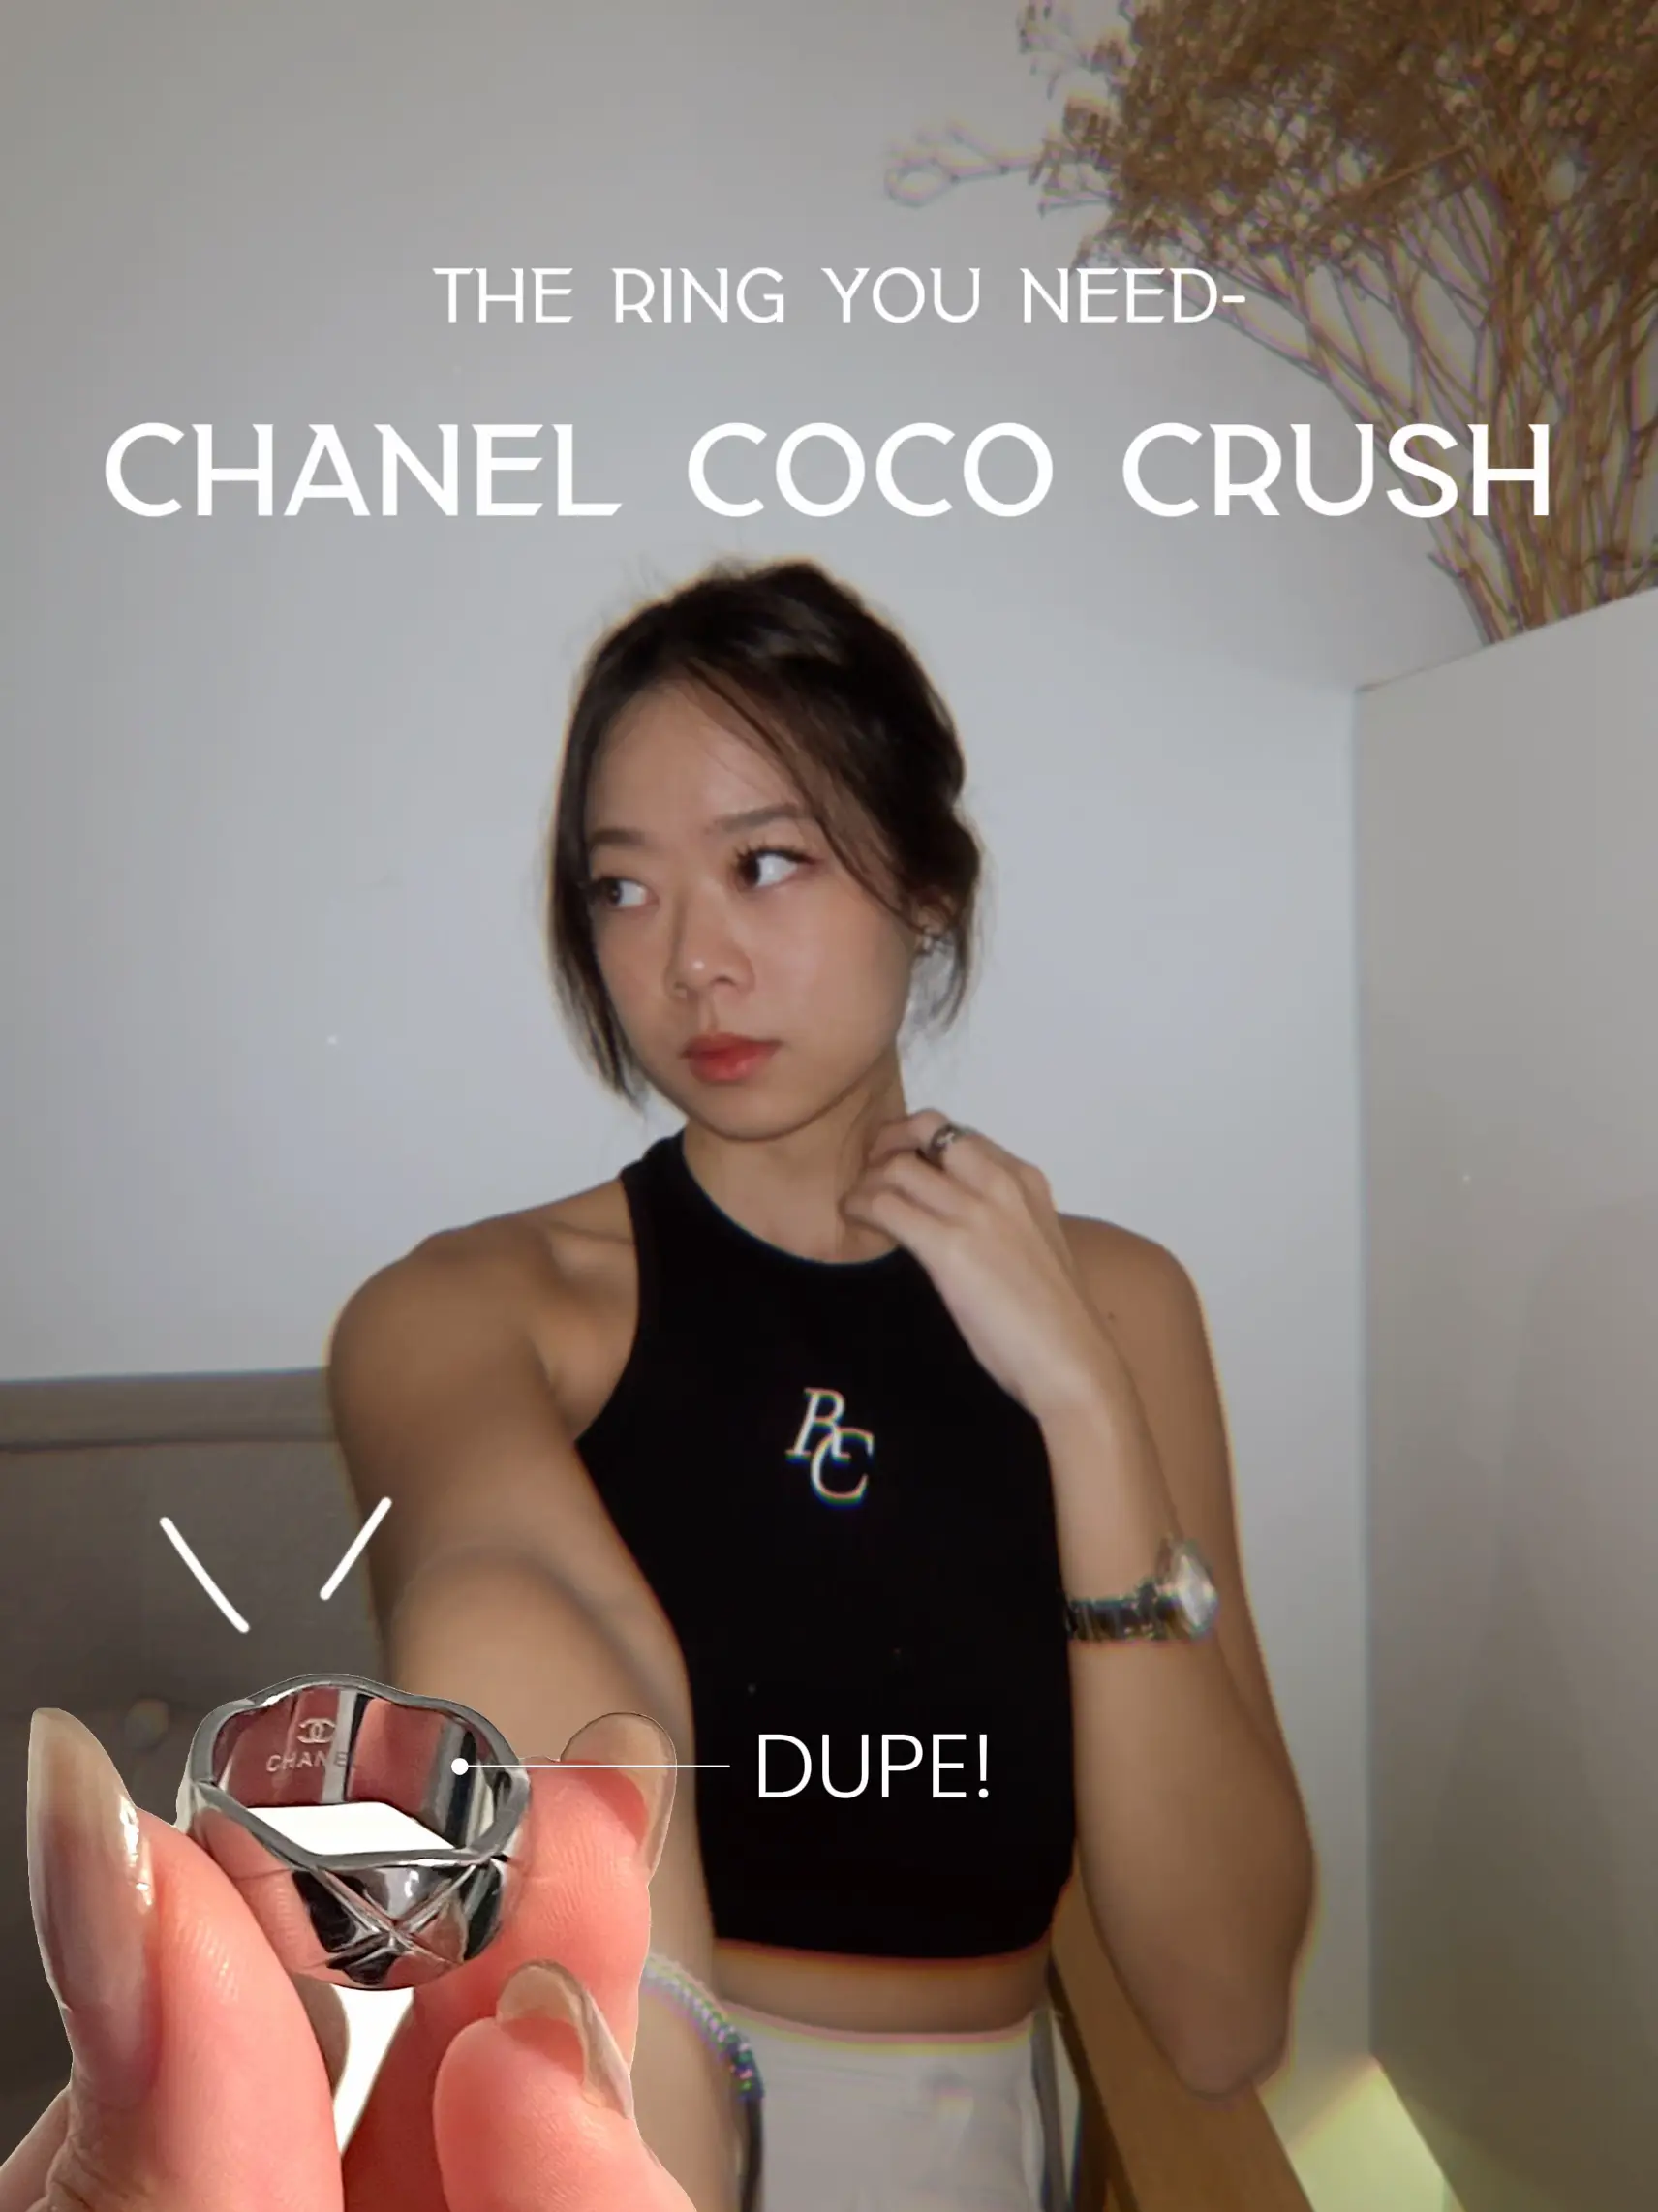 CHANEL Coco Crush GRADE A dupe 💍, Gallery posted by Leona